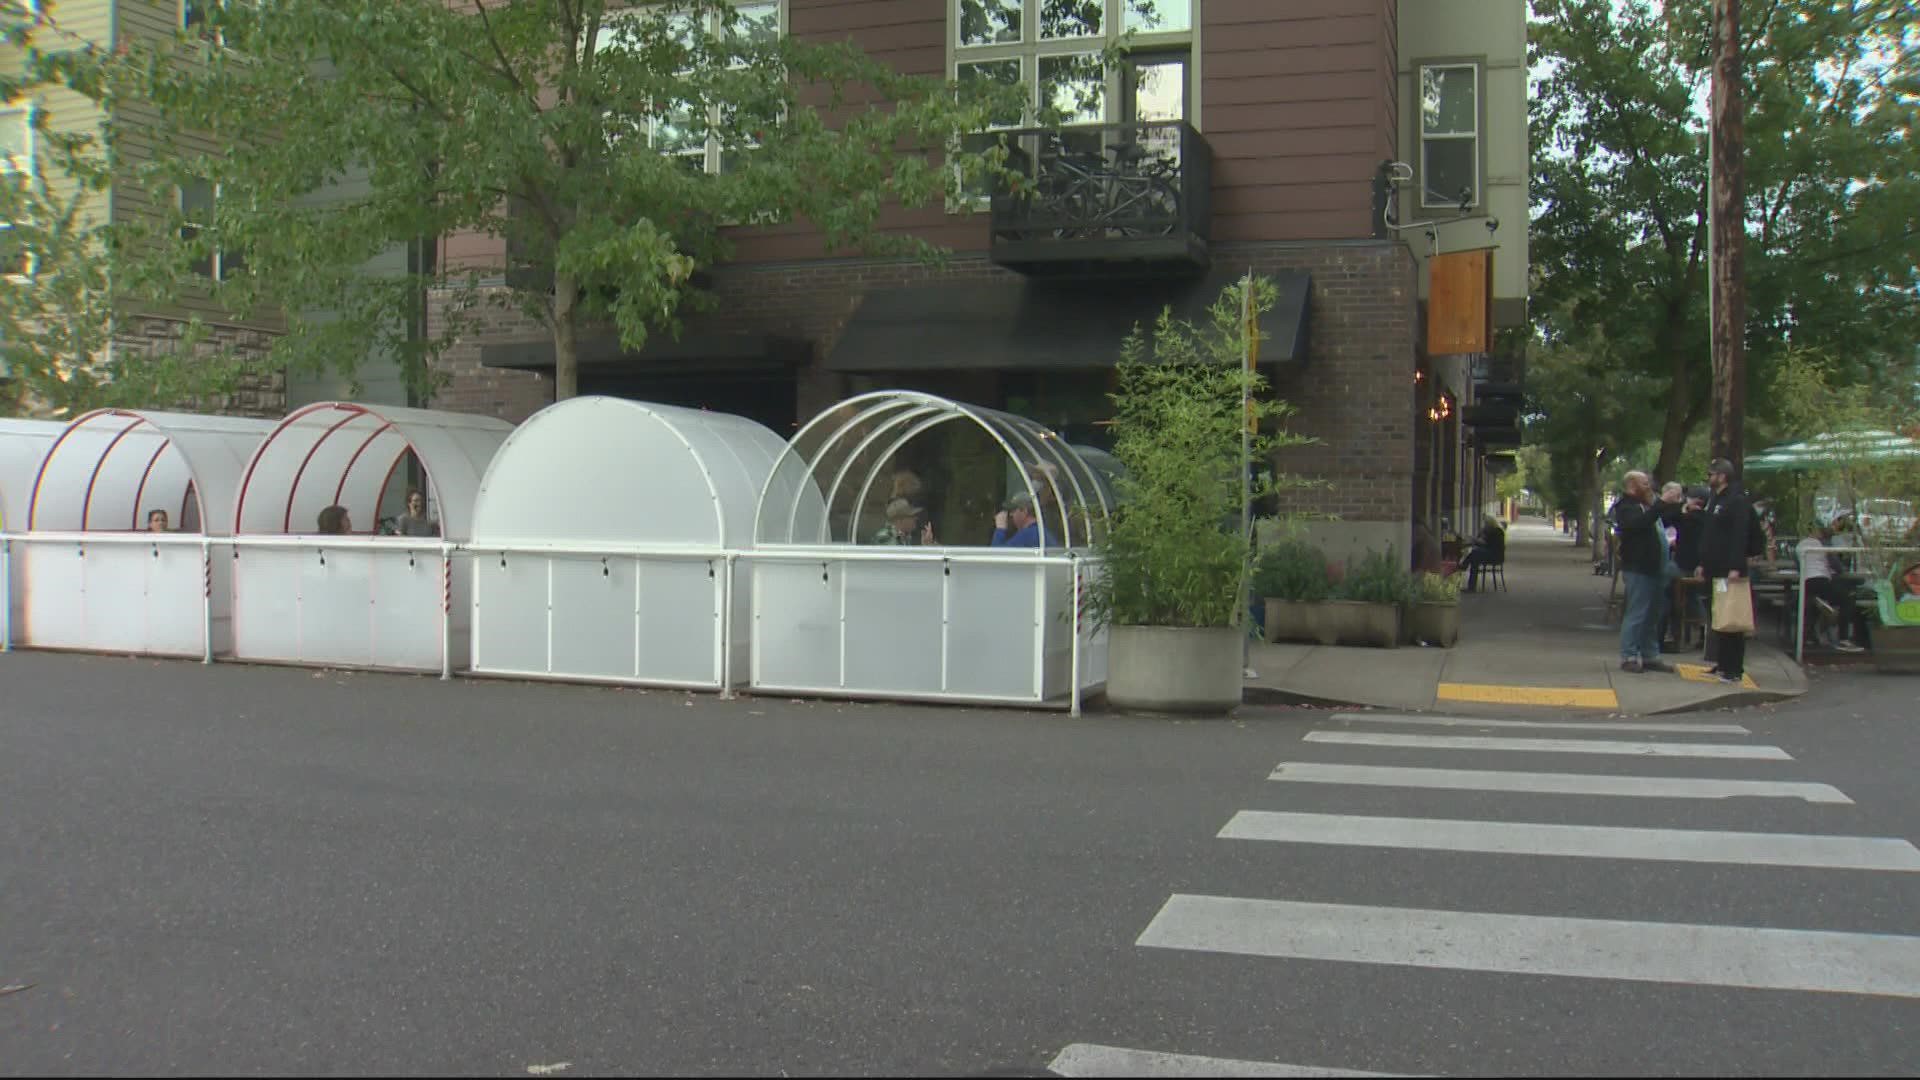 There have been two armed robberies and a homicide in  the North Portland neighborhood within the last month.